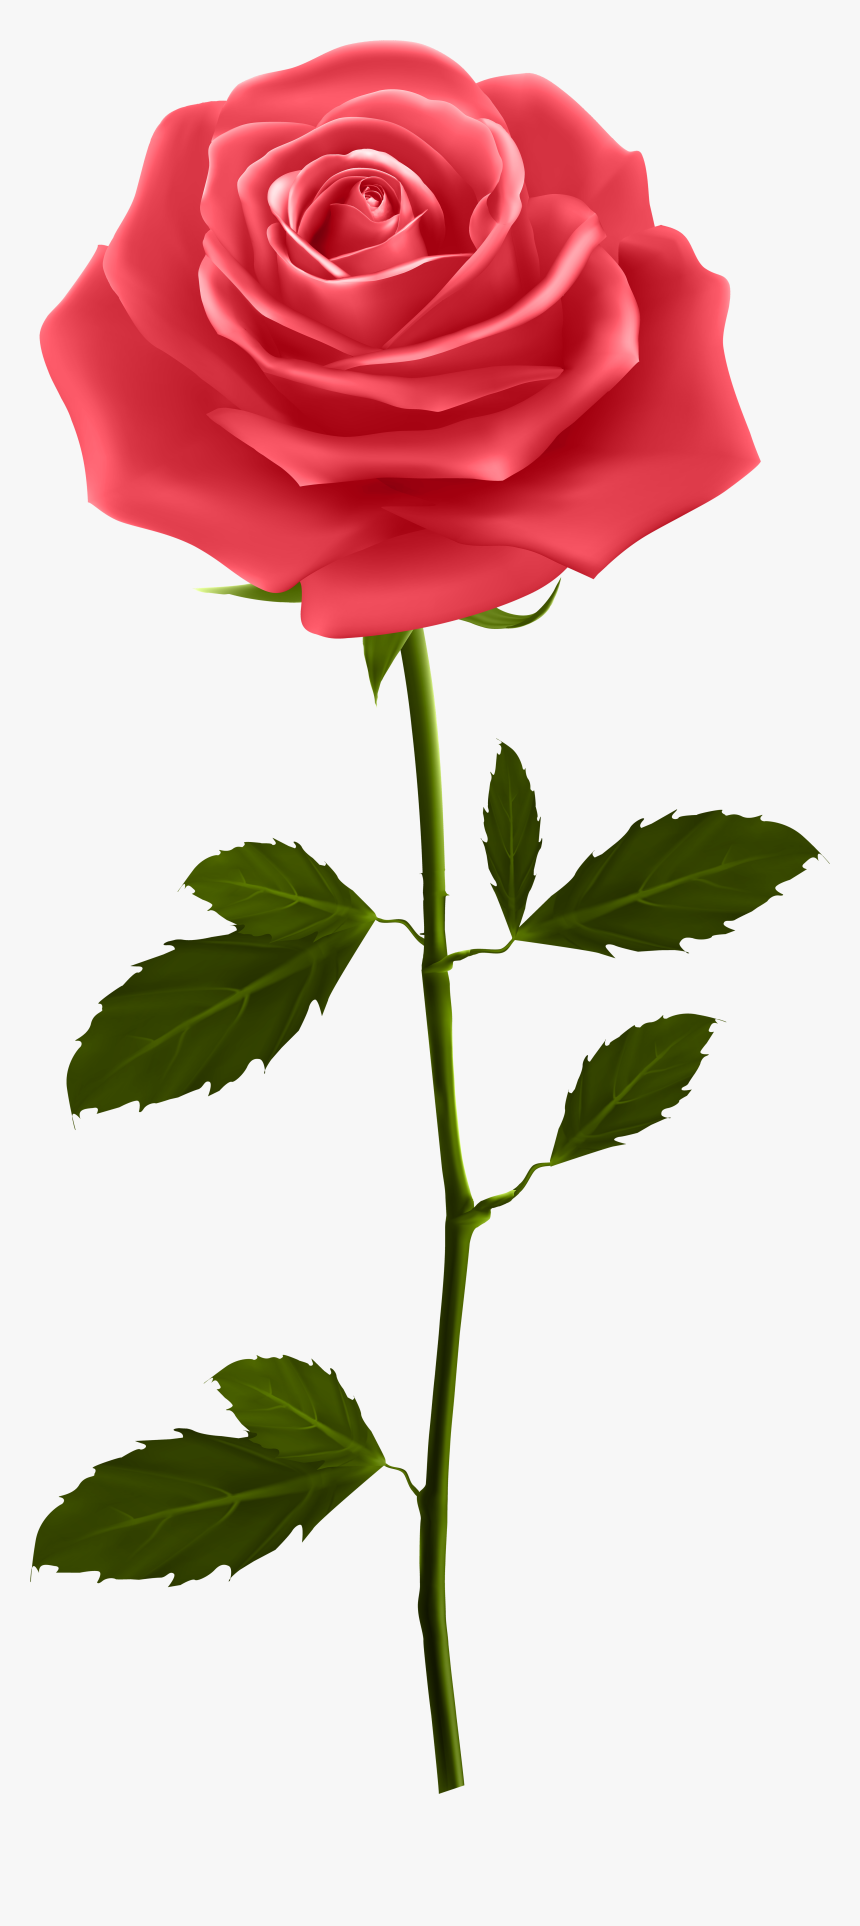 Red Rose With Stem - Rose With Stem Png, Transparent Png, Free Download